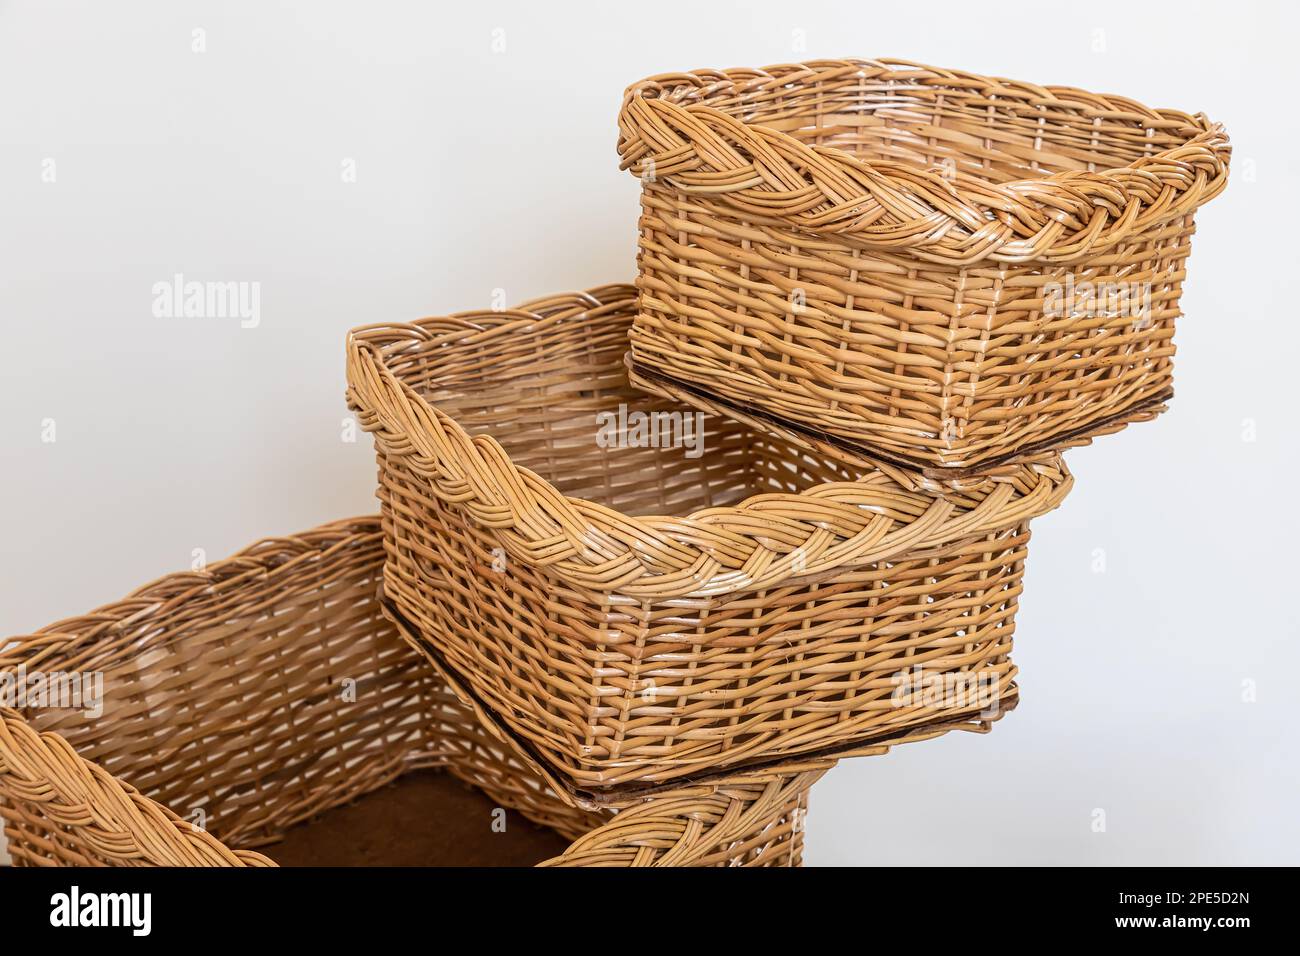 products from a rod. wickerwork is a traditional folk craft. handmade. Stock Photo